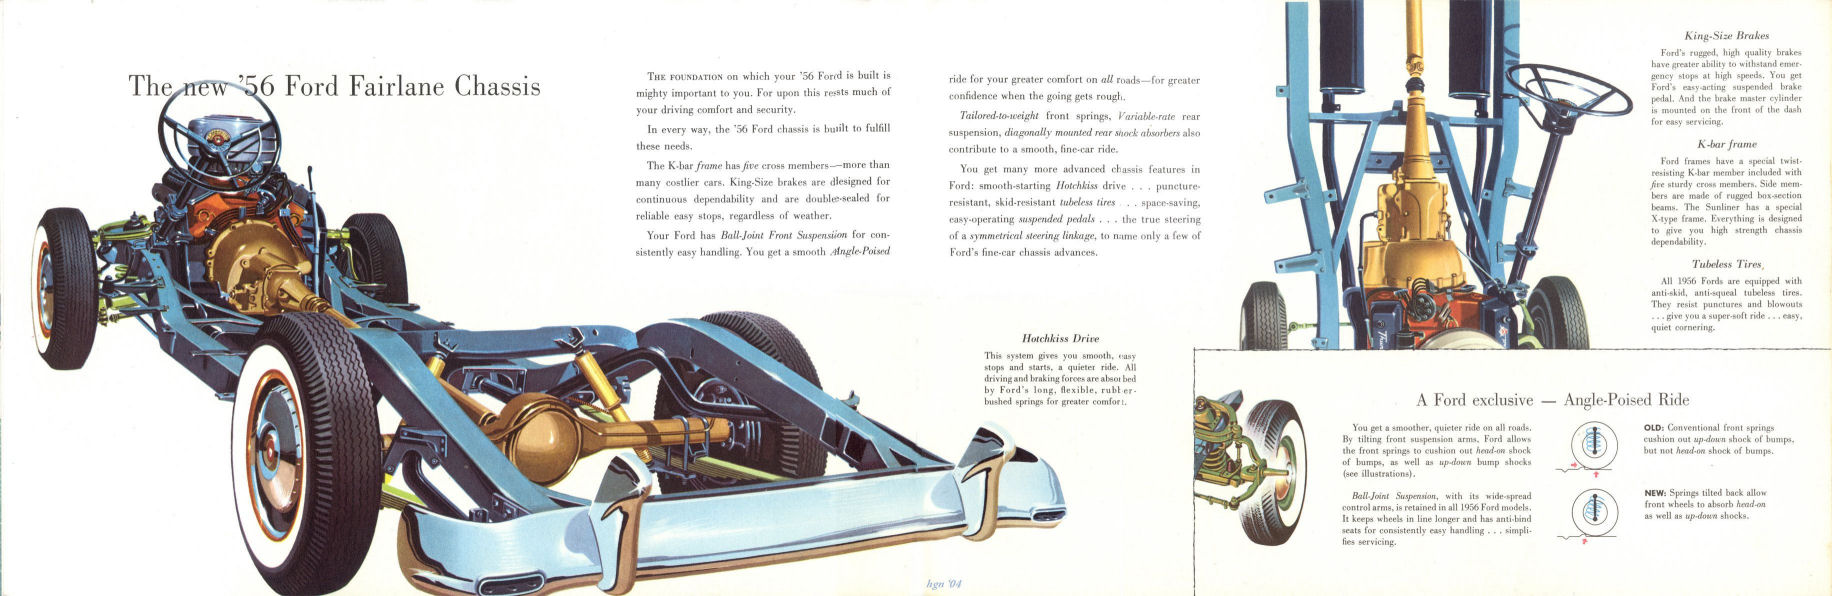 1956 Ford Fairlane Brochure Page 3